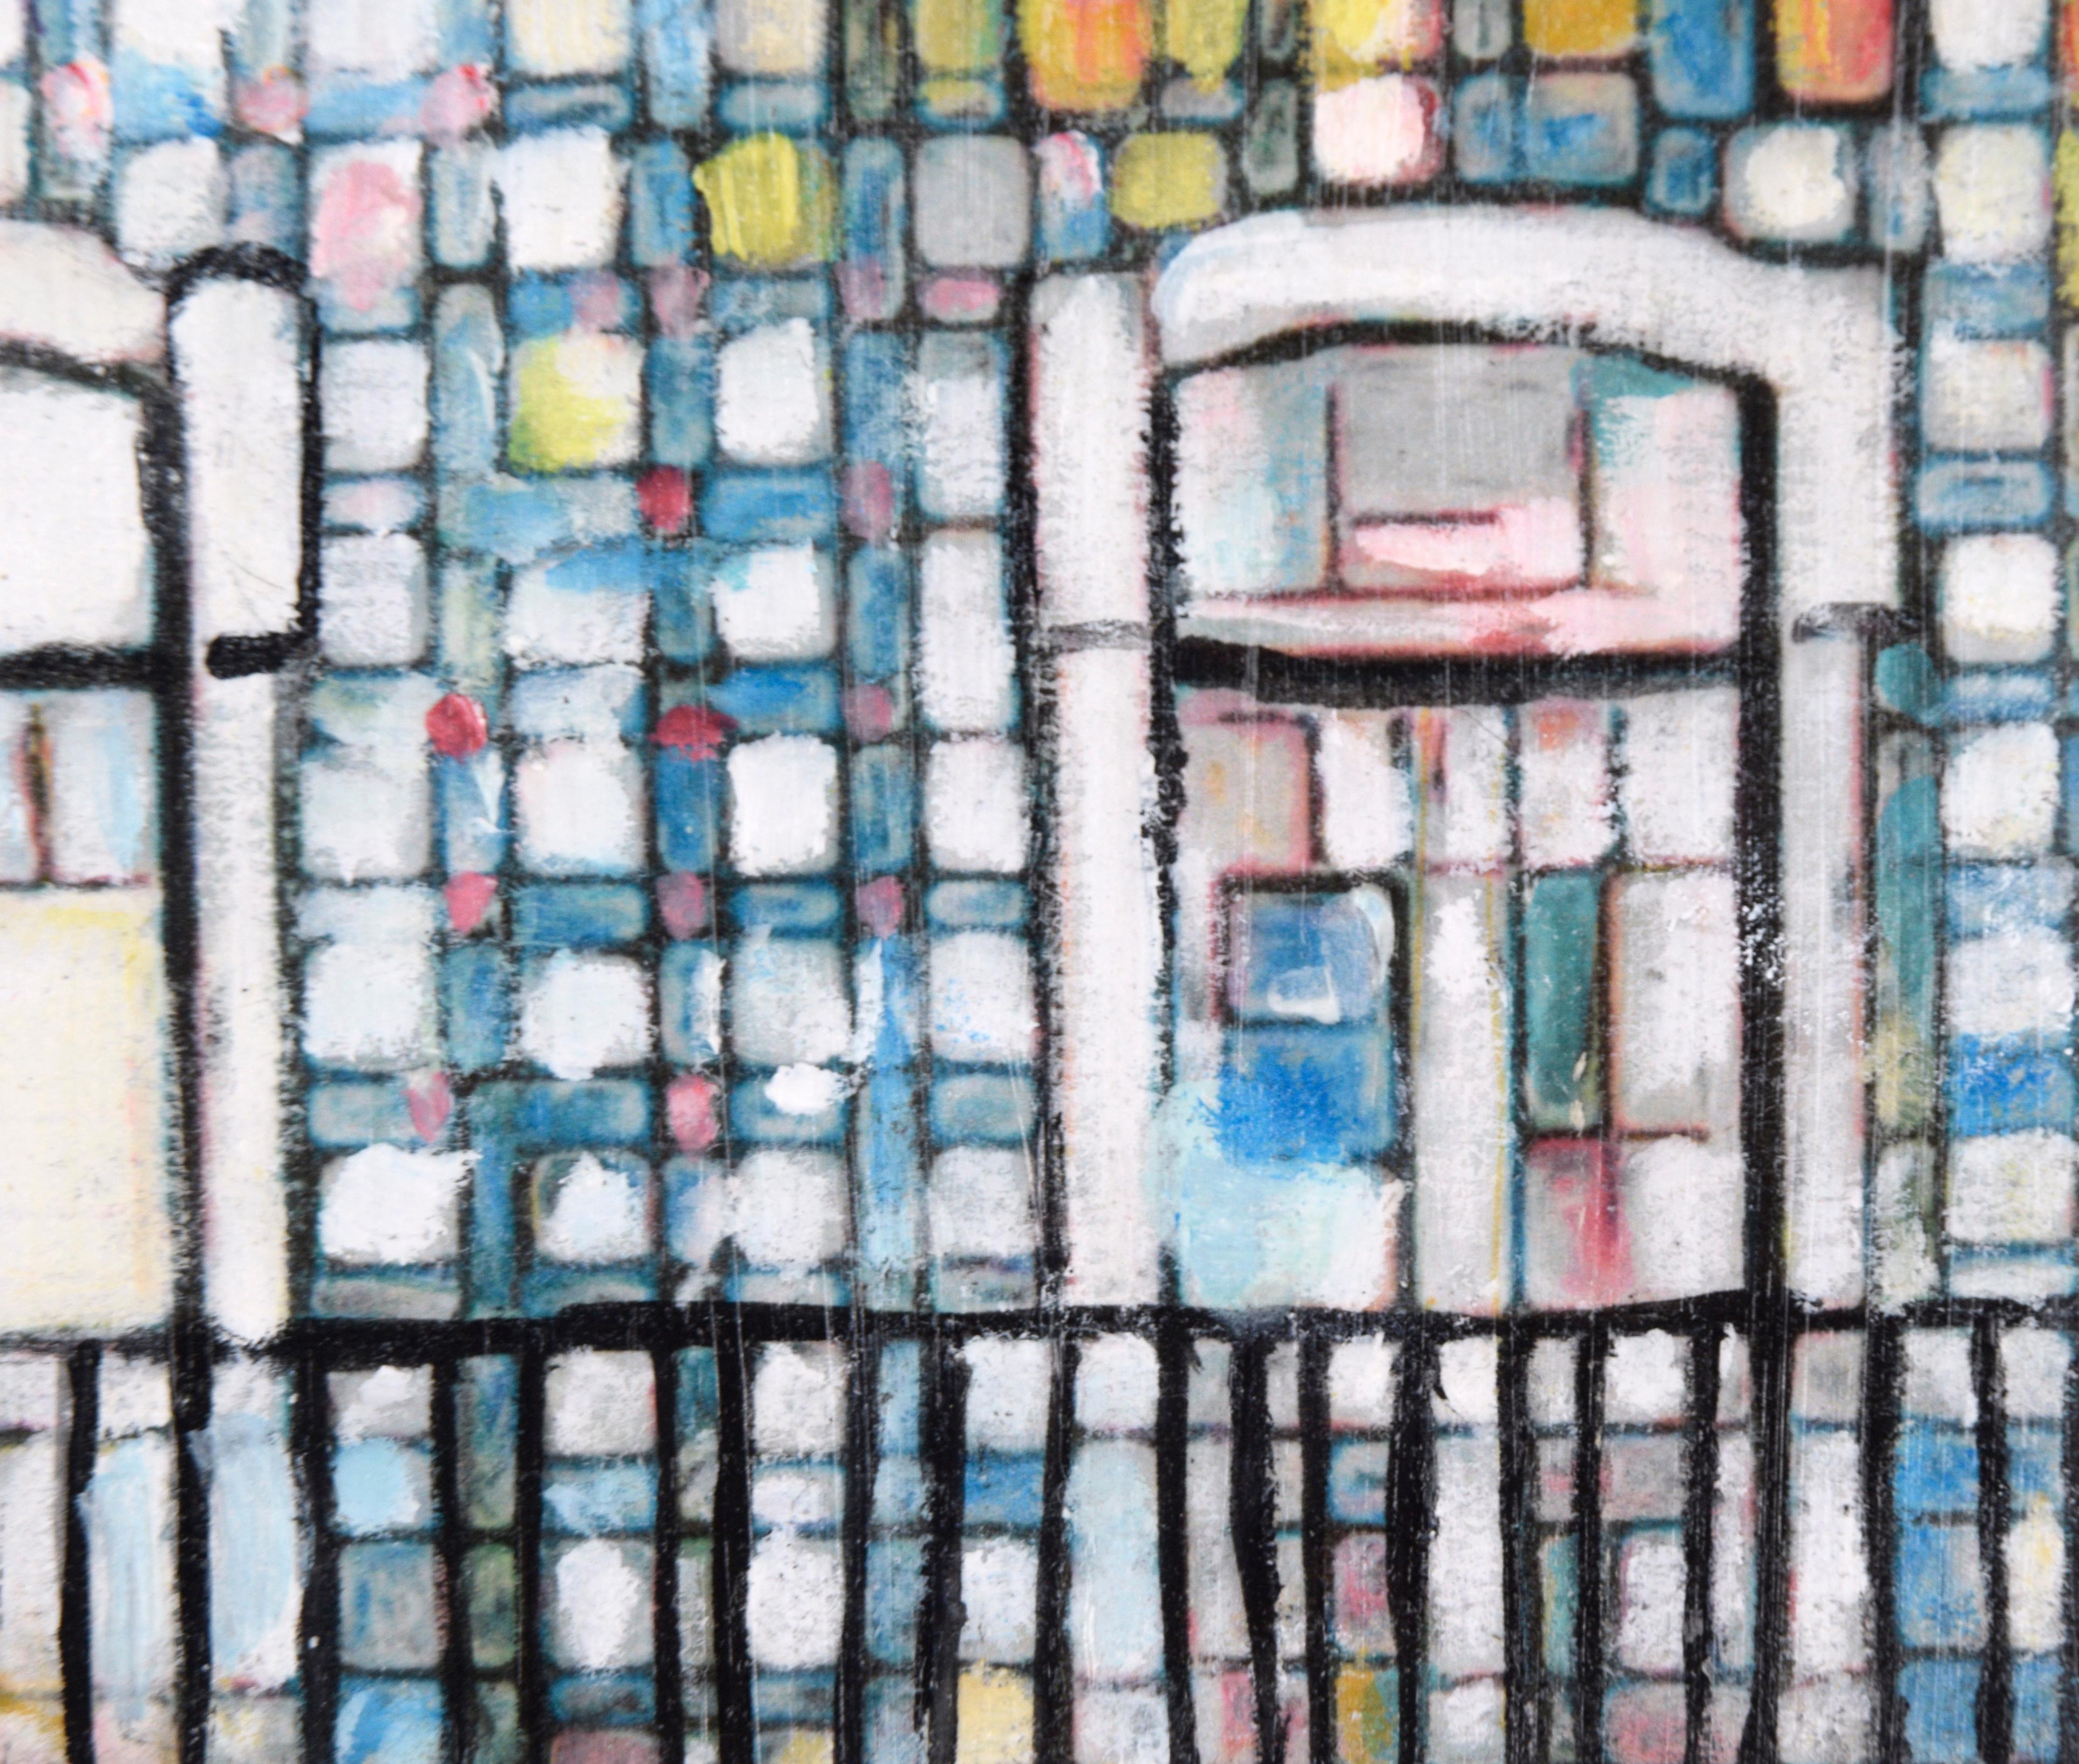 Vibrant depiction of windows with balconies by Ana Doolin (Portuguese, b. 1961). Signed 